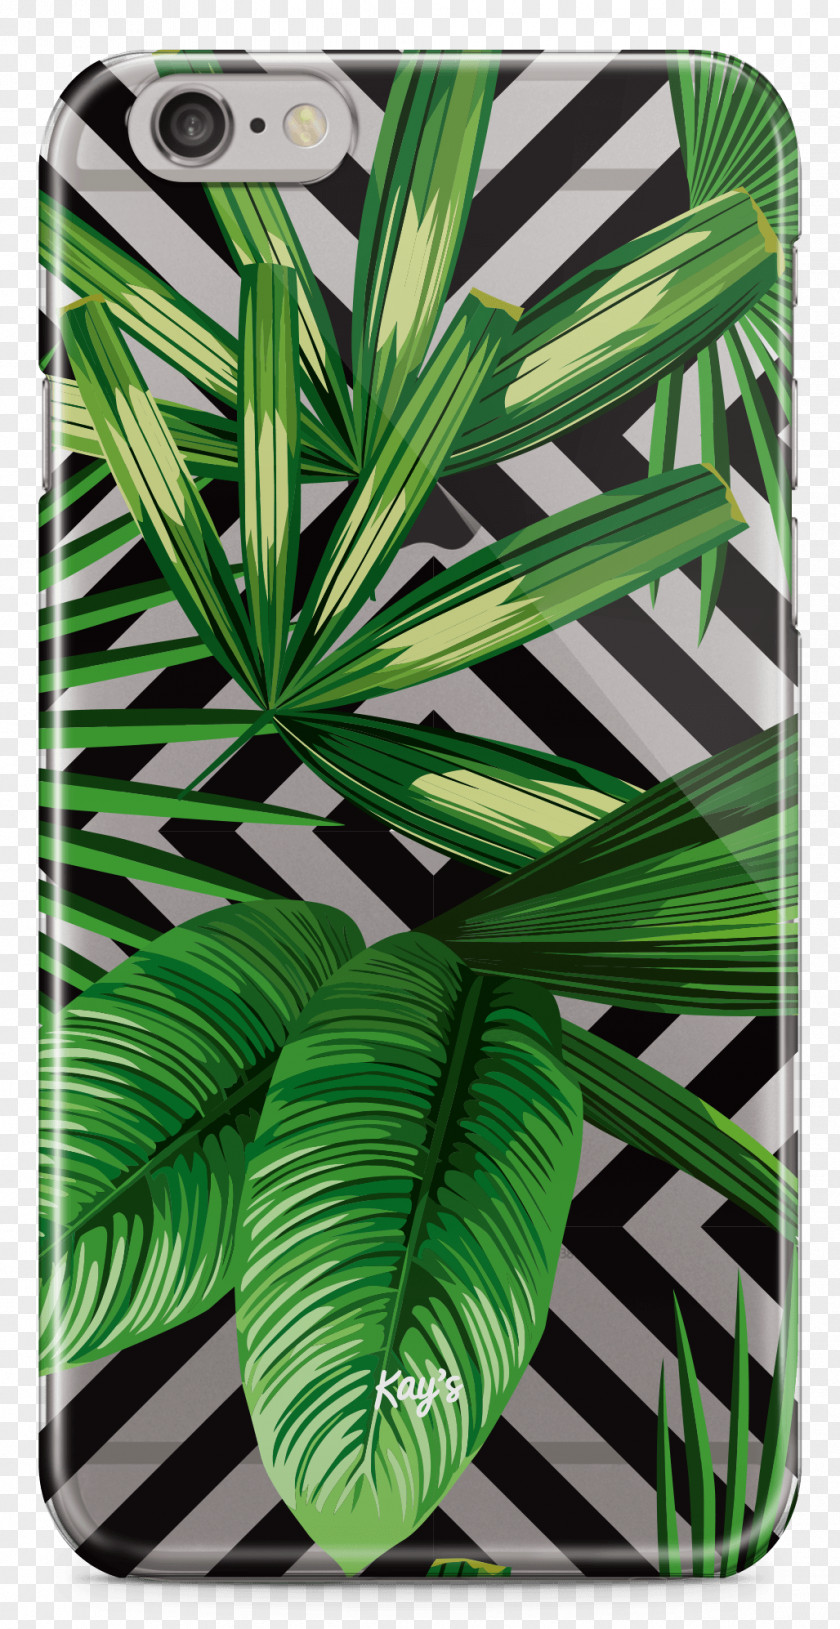 Tropical Woody Bamboos Materials Thermoplastic Polyurethane Glass Crystal Mobile Phones Arecaceae PNG